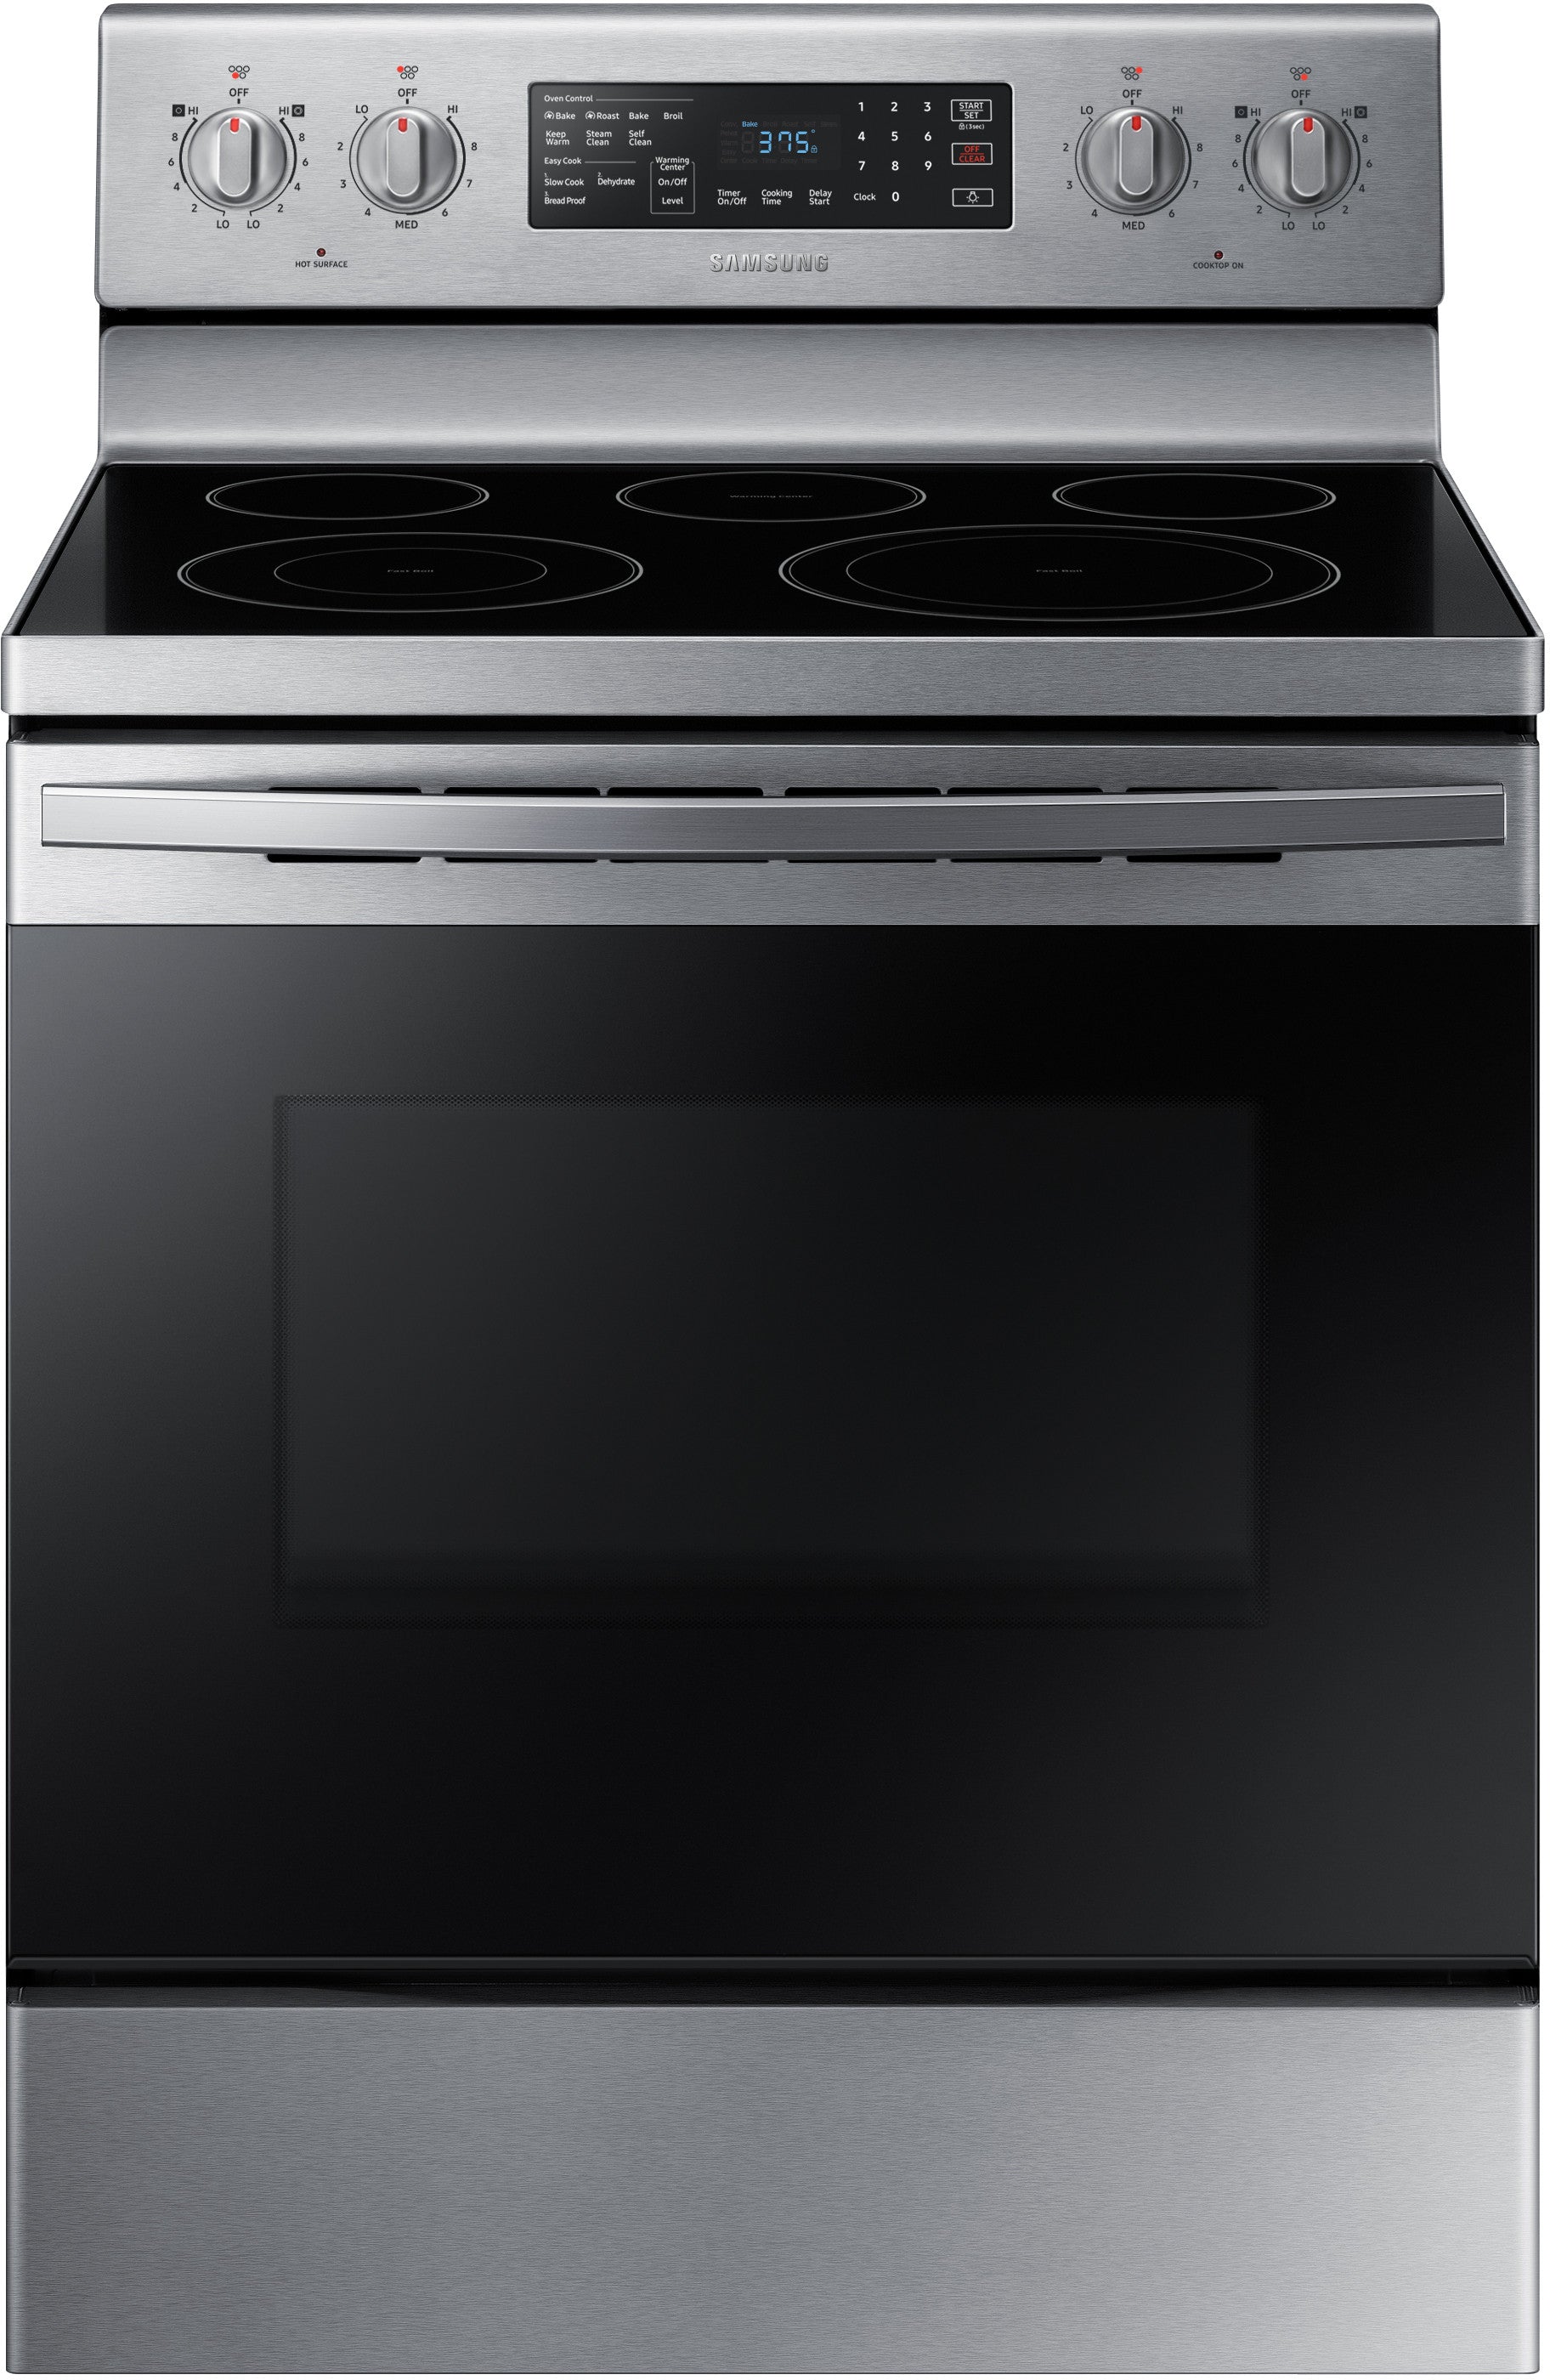 Samsung NE59R4321SS/AA 5.9 Cu. Ft. Freestanding Electric Range In Stainless Steel - Samsung Parts USA